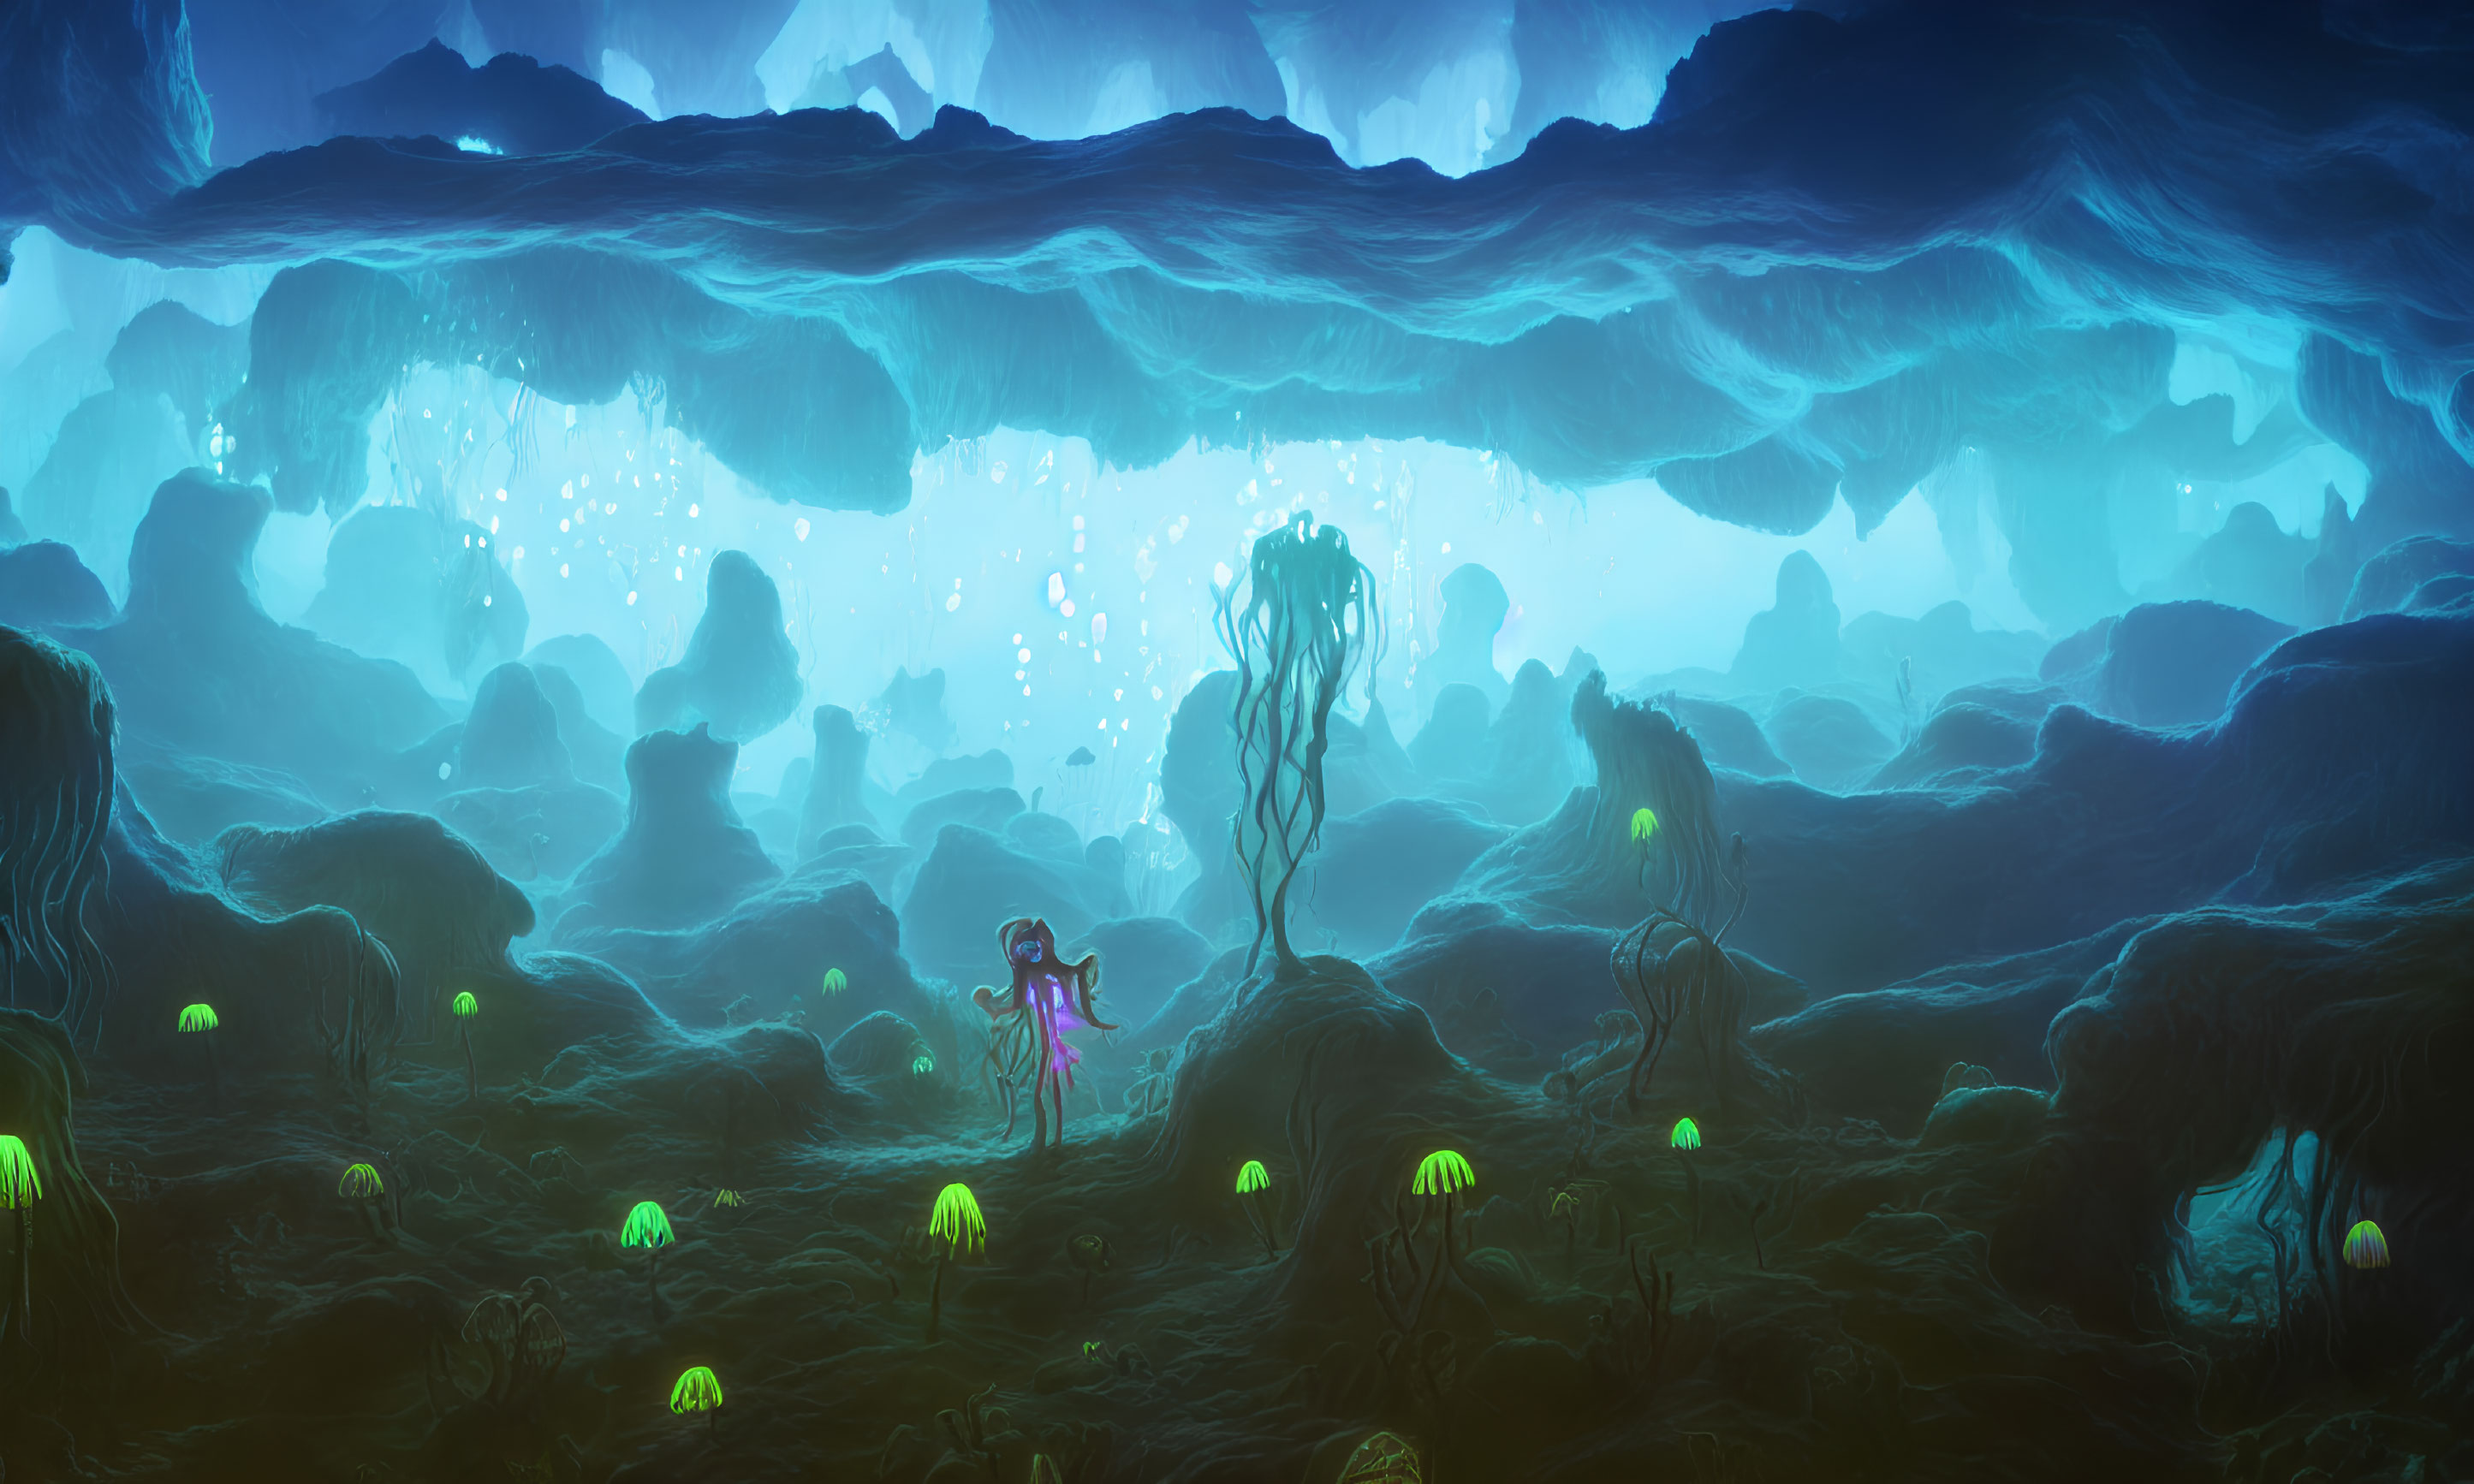 Underwater scene with mermaid, jellyfish, and glowing flora in deep blue cave